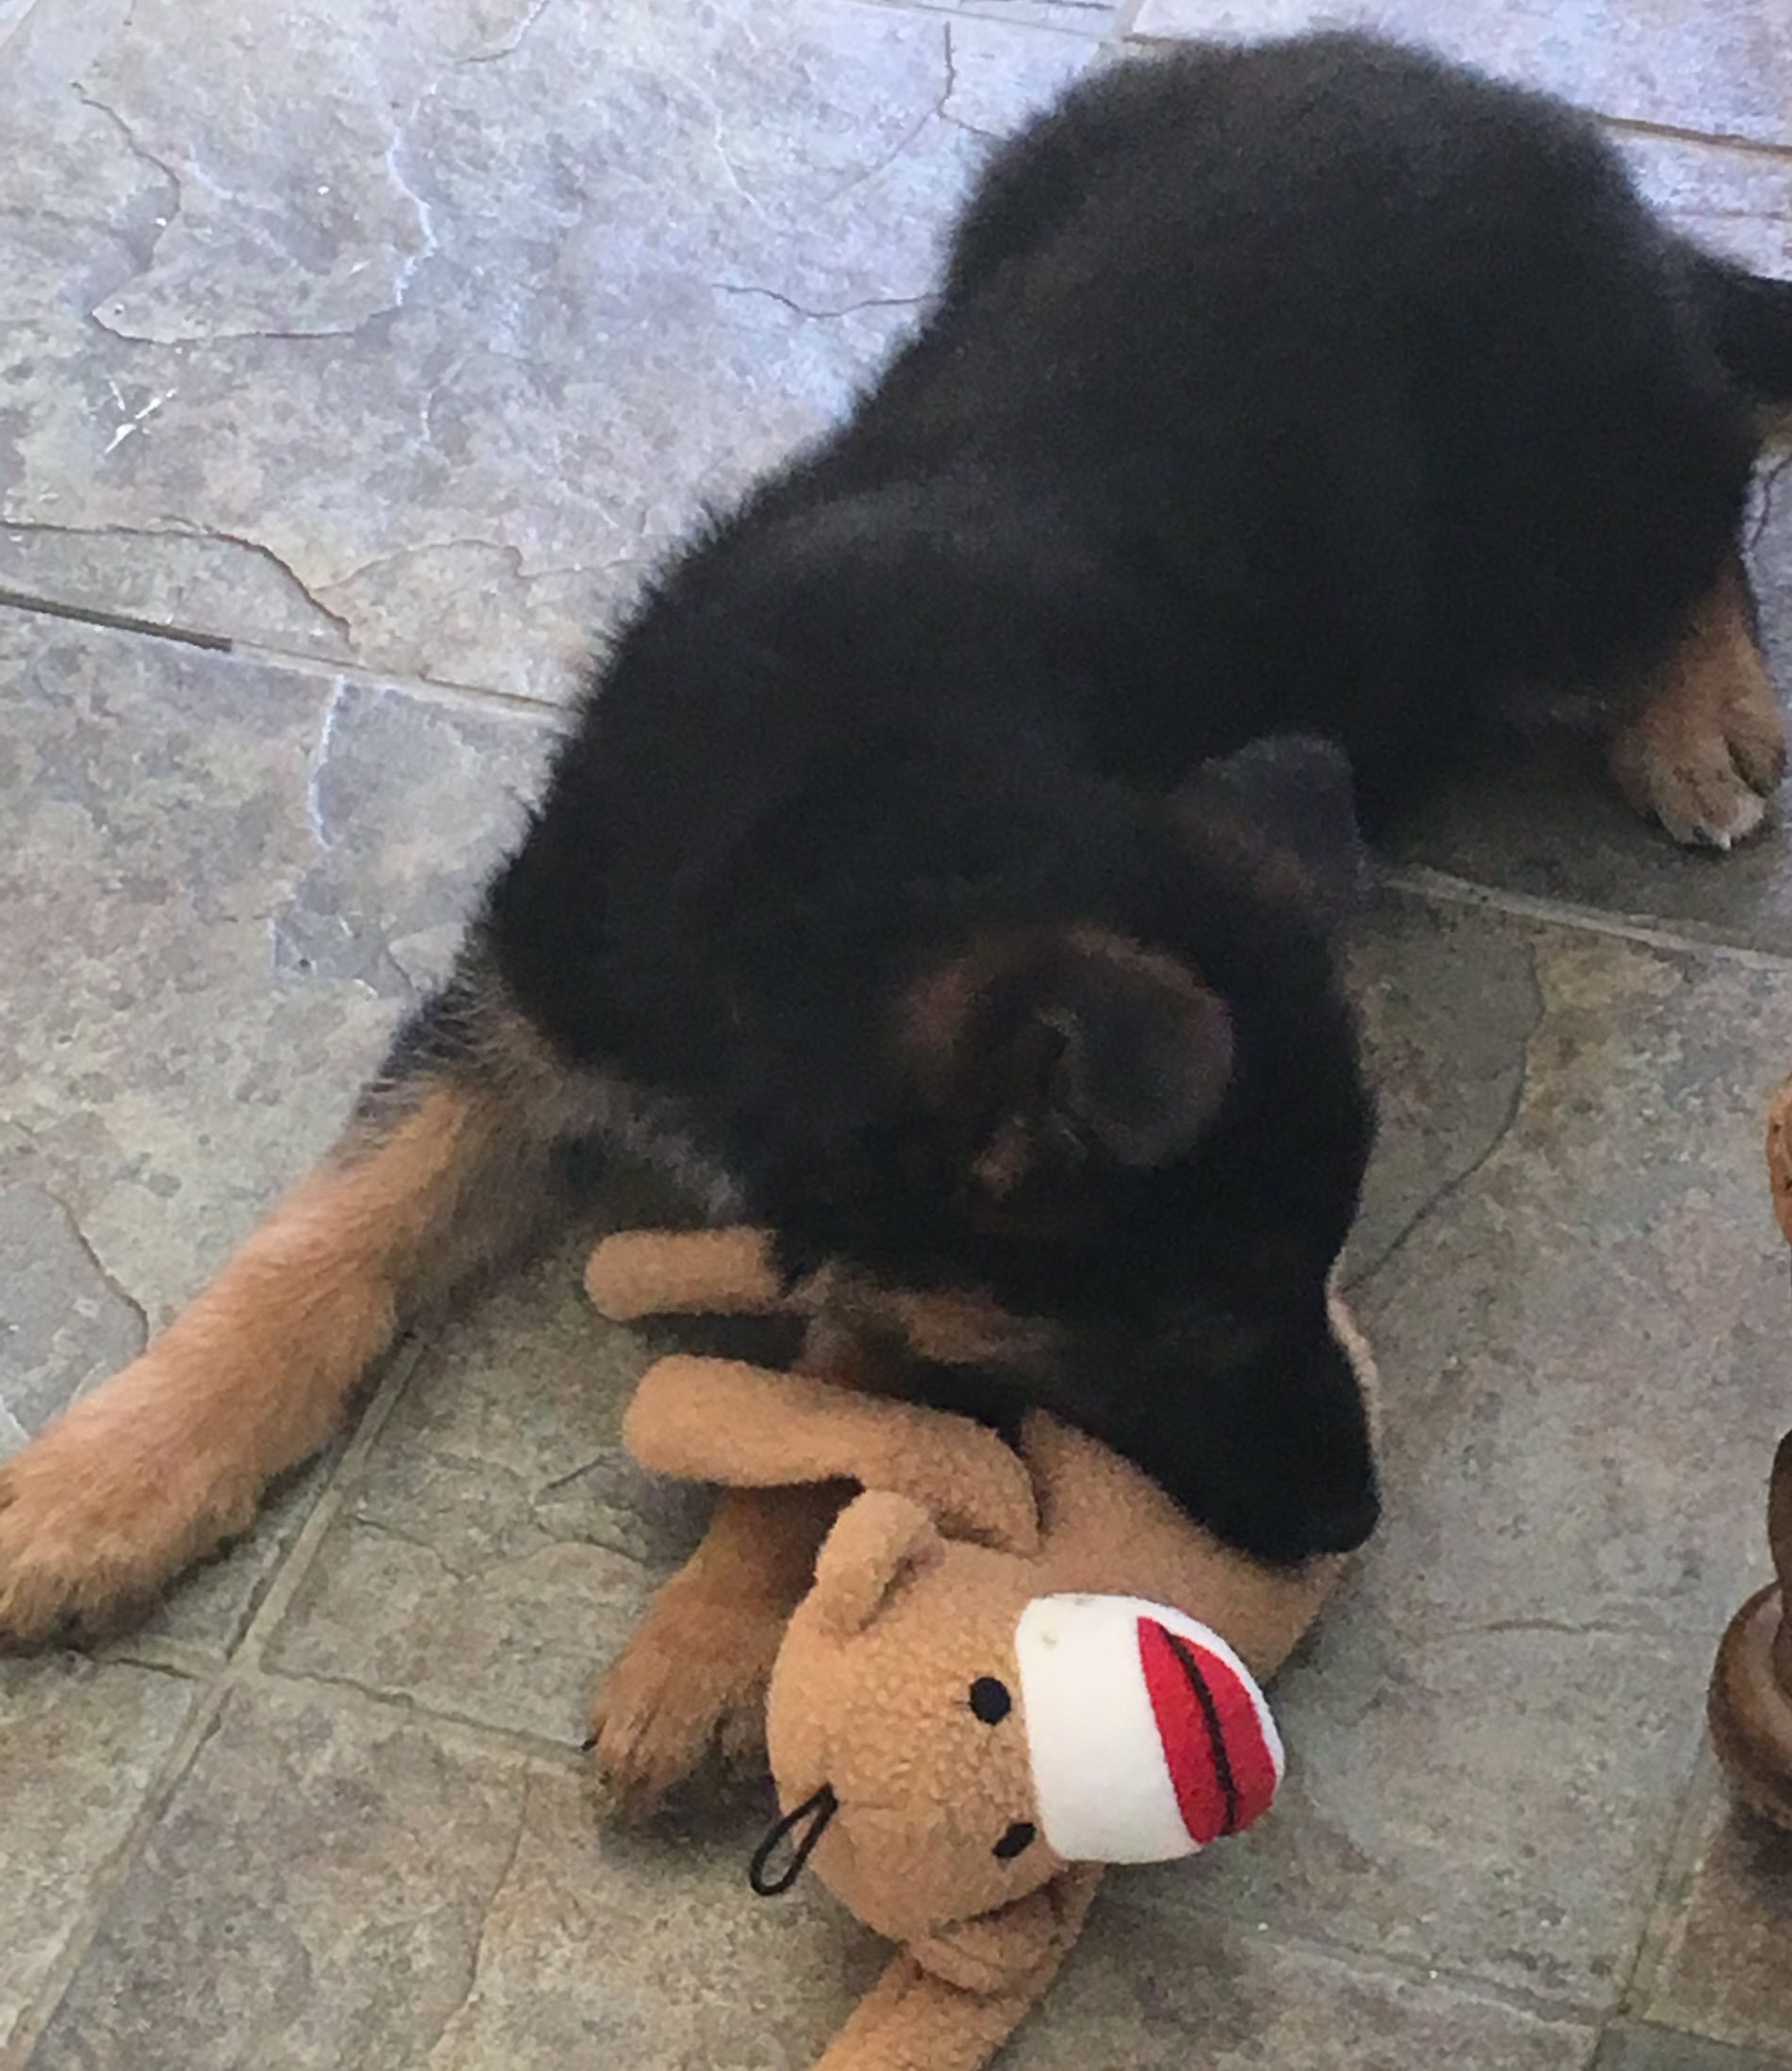 German shepherd puppy playing with a toy.